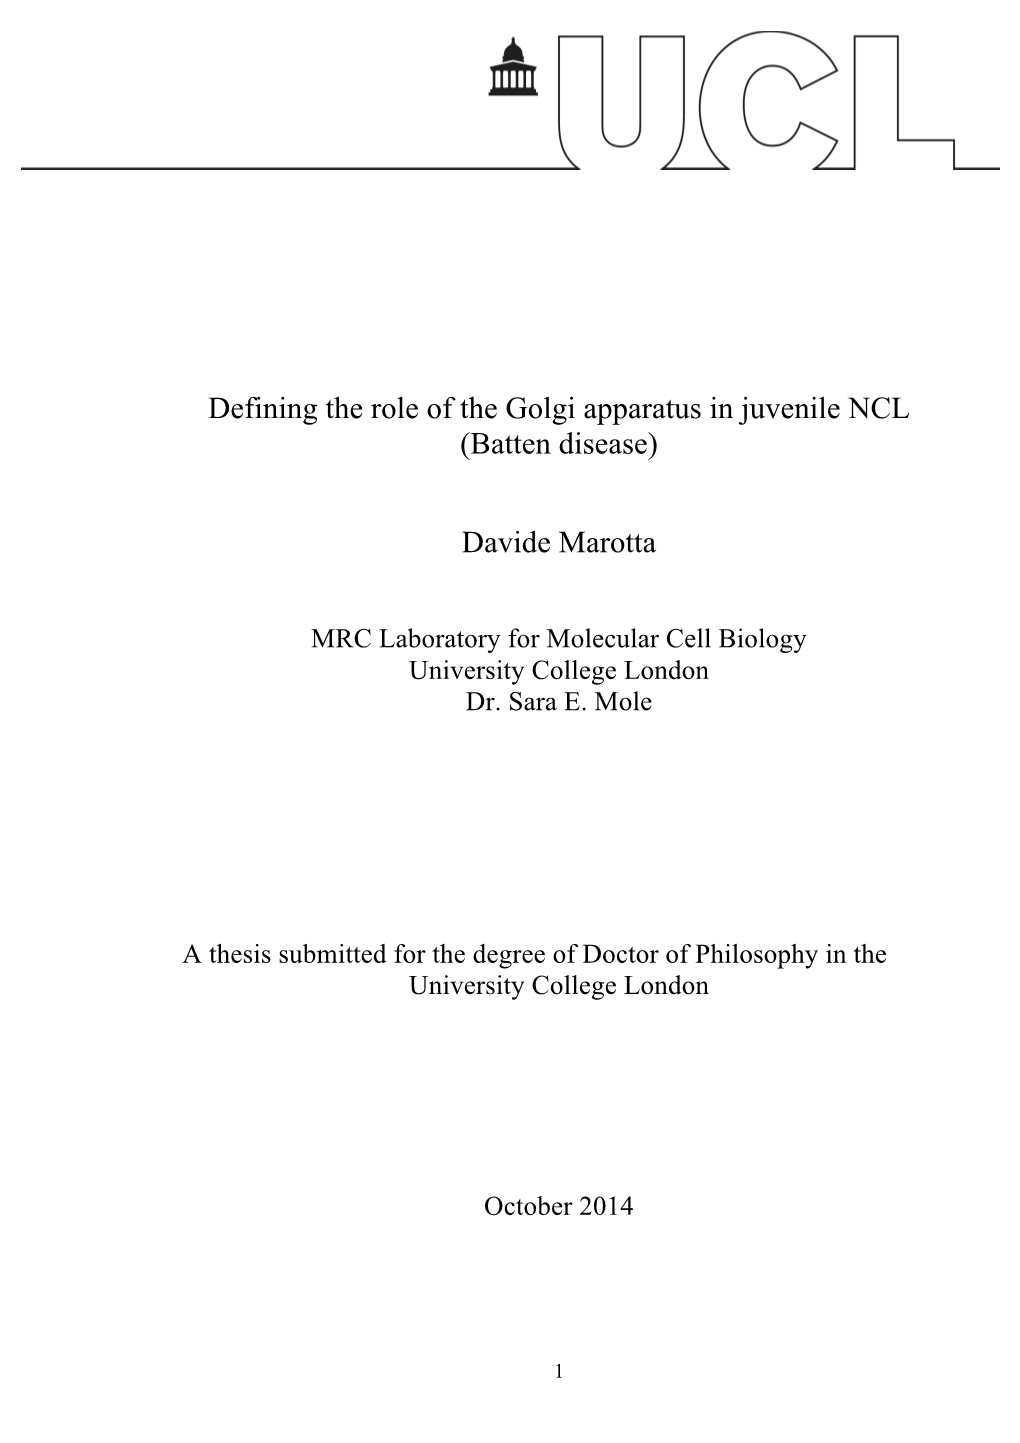 Defining the Role of the Golgi Apparatus in Juvenile NCL (Batten Disease)